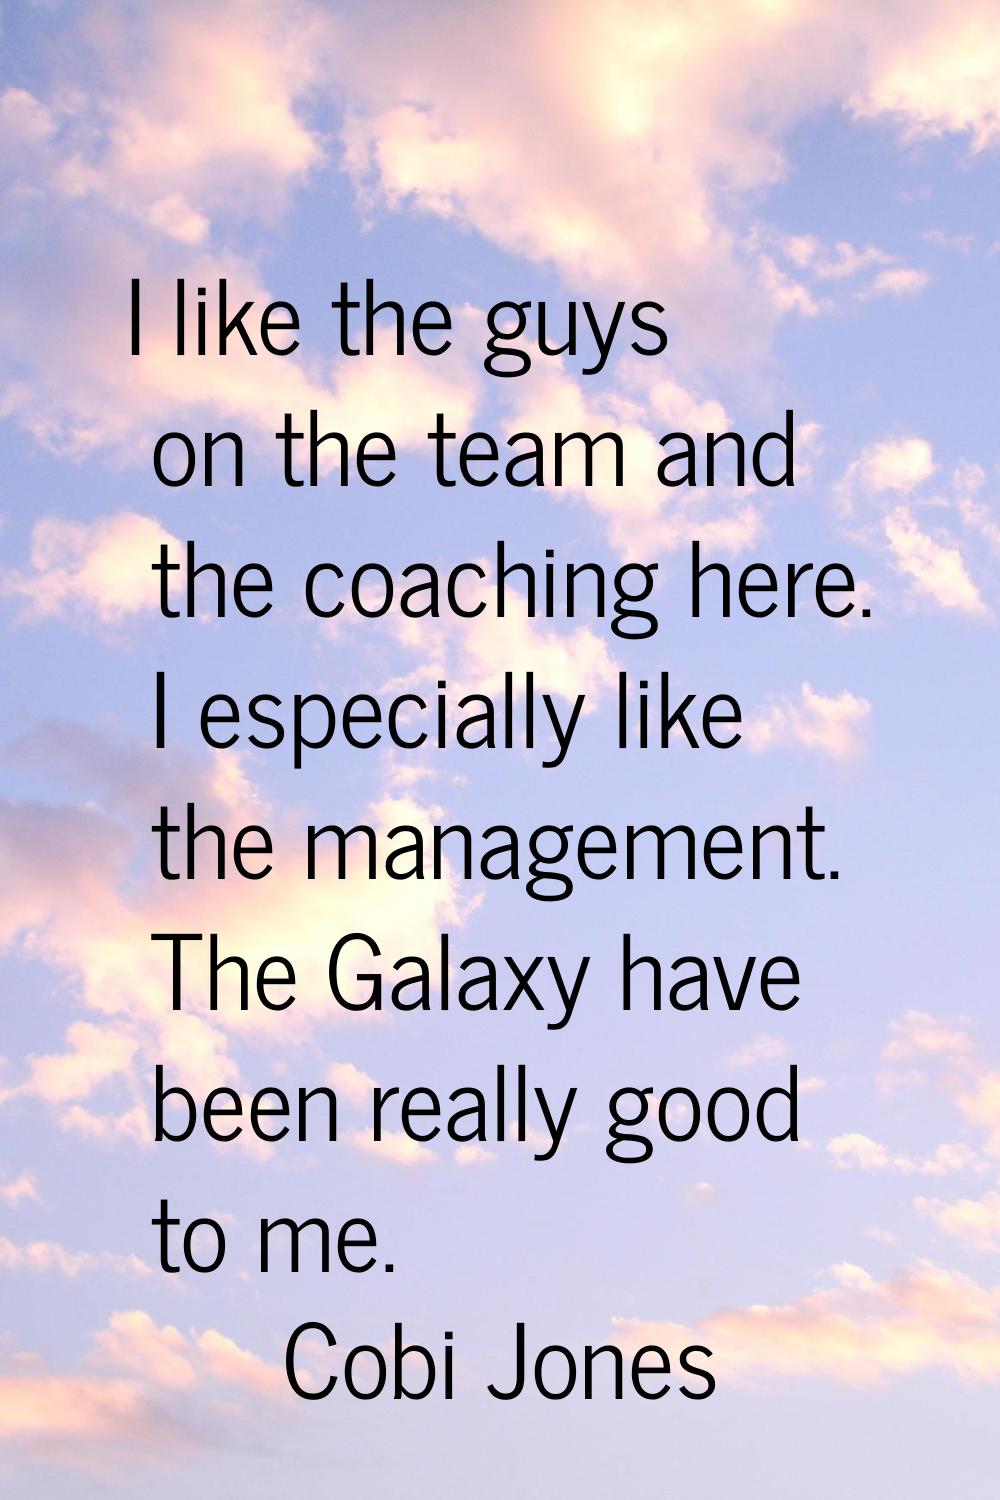 I like the guys on the team and the coaching here. I especially like the management. The Galaxy hav